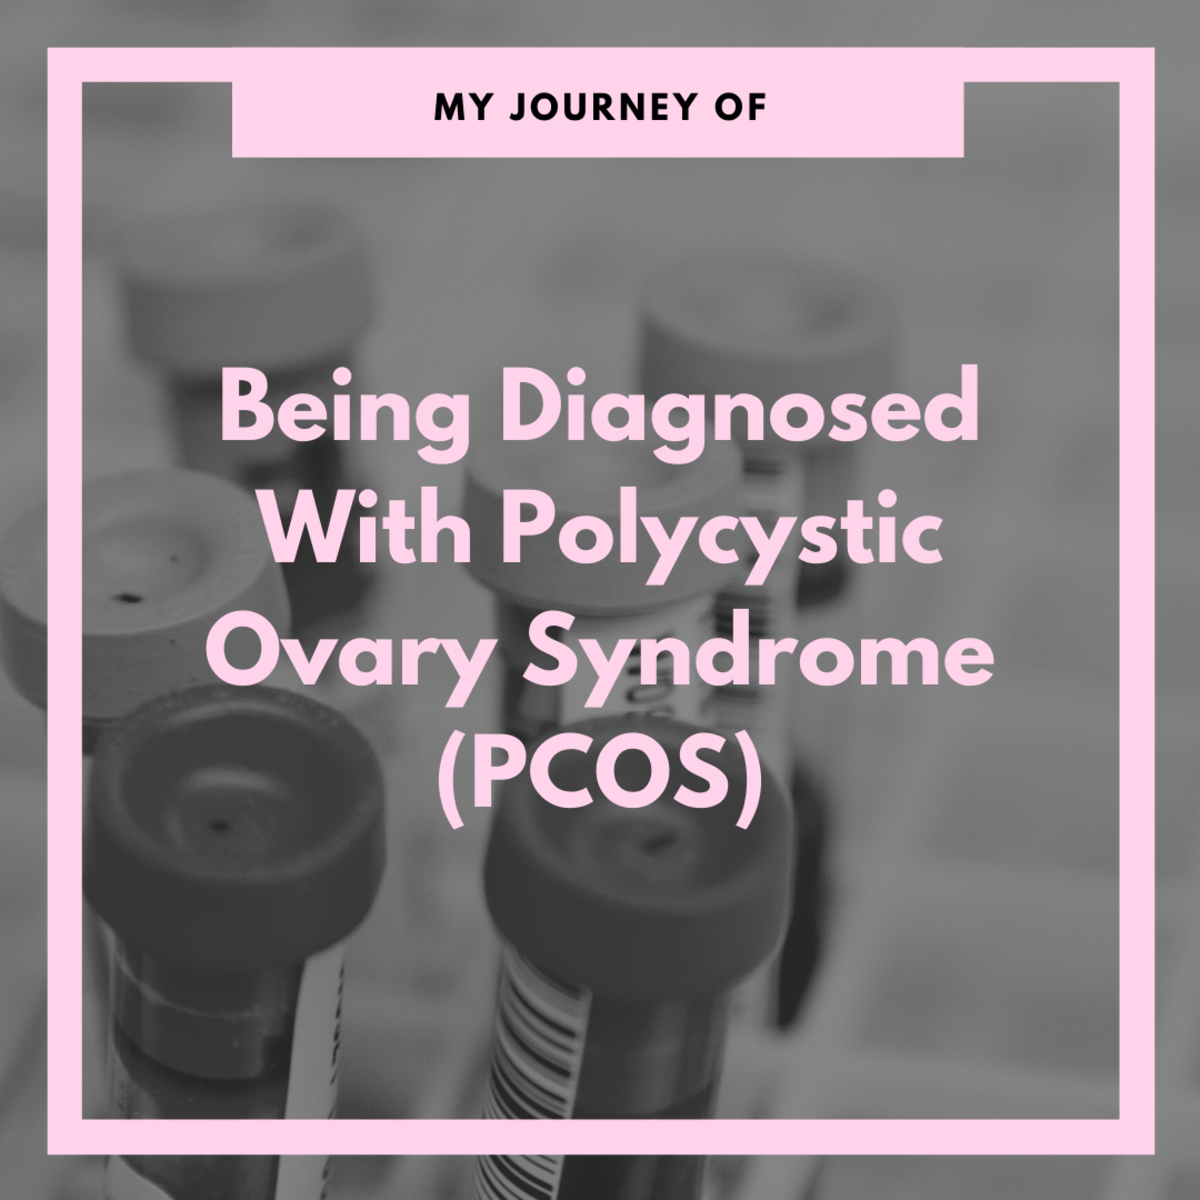 How I Got Diagnosed With Polycystic Ovary Syndrome (PCOS)